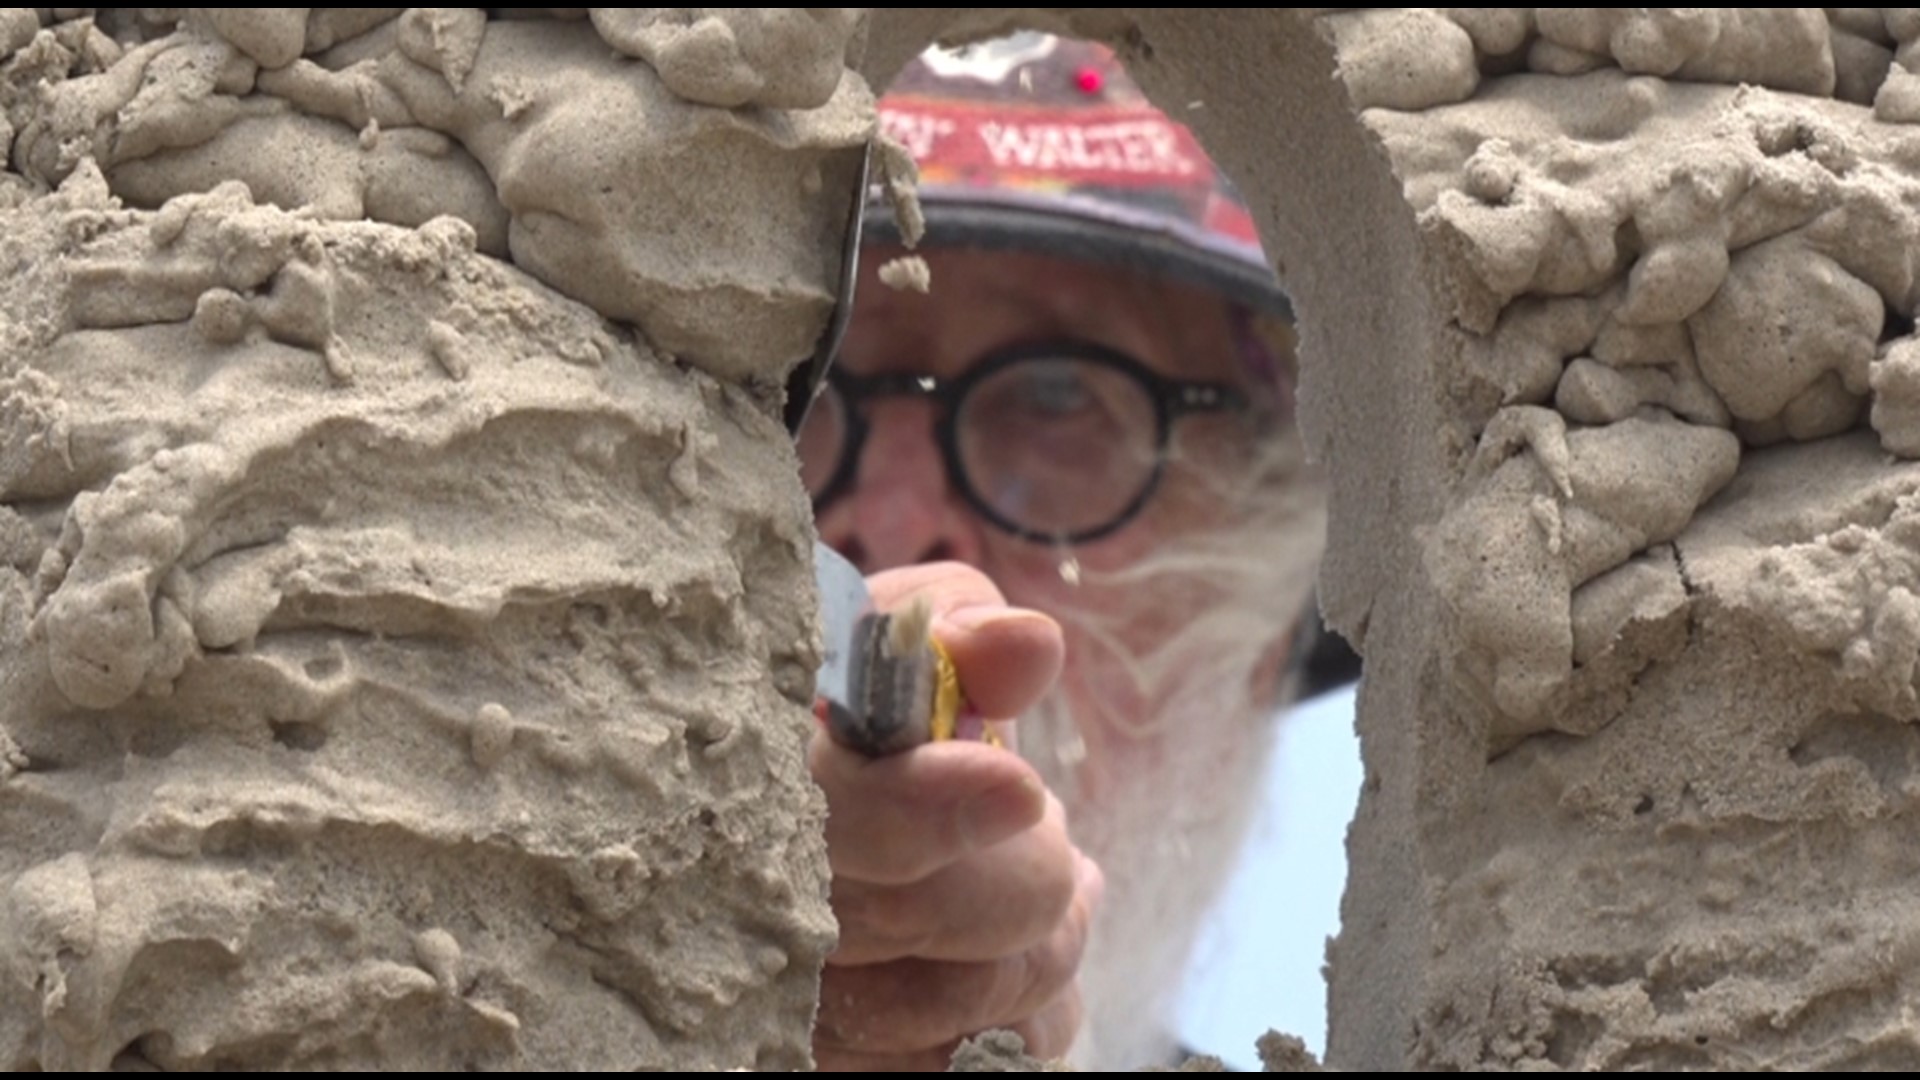 Stop by Texas SandFest at Port Aransas Beach starting at 9 a.m. everyday until Sunday.